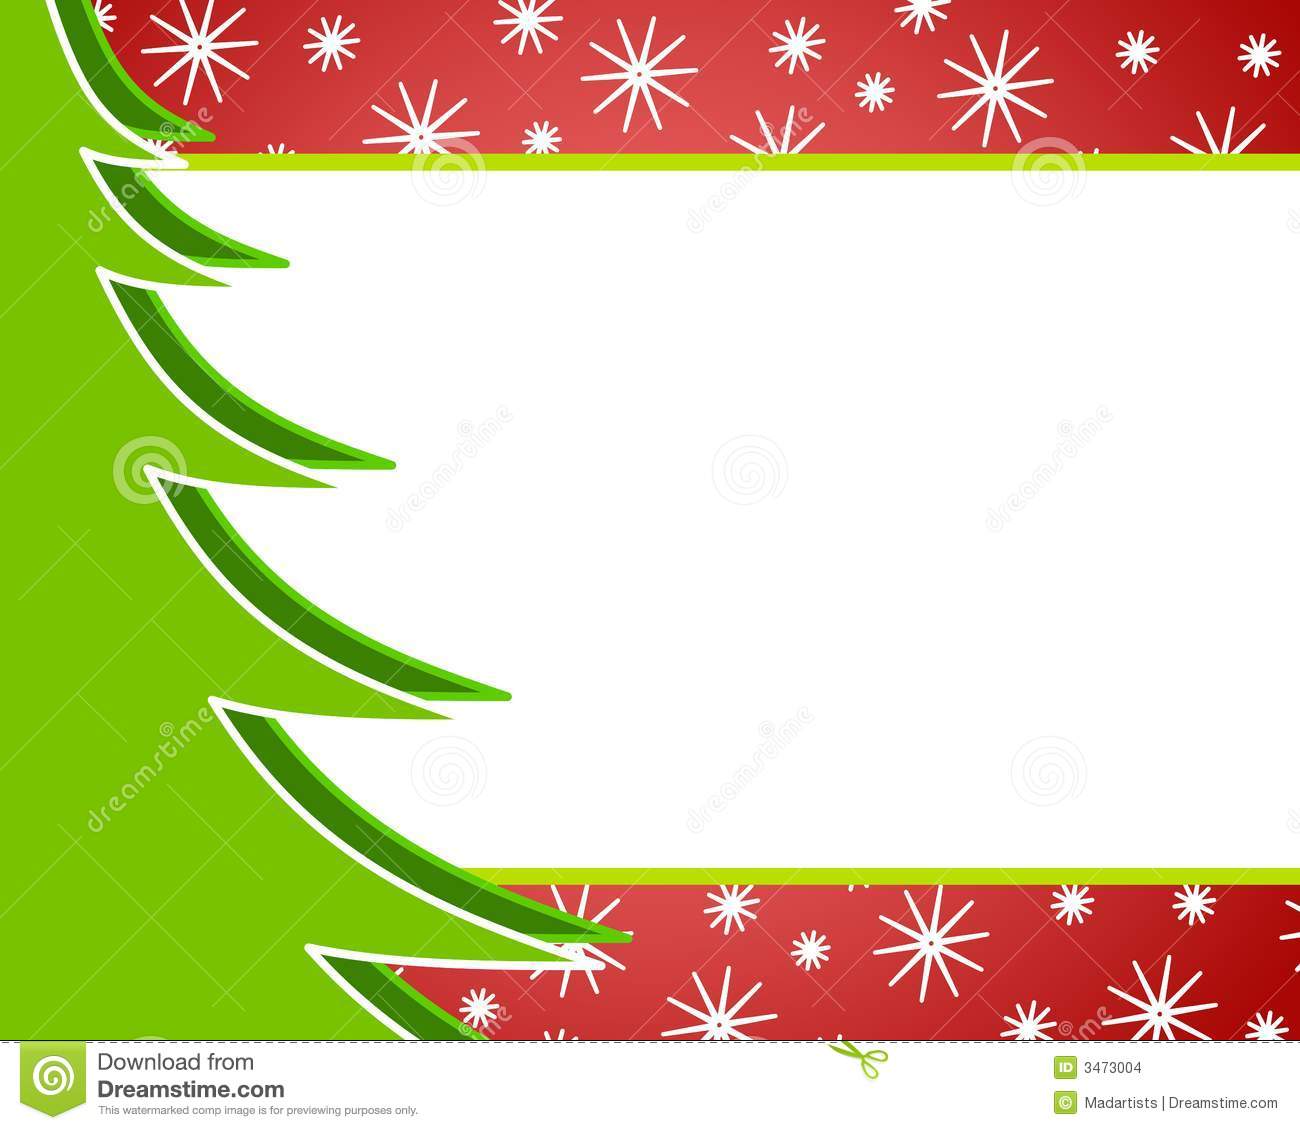 Clip Art Background Illustration Featuring Half A Christmas Tree Set